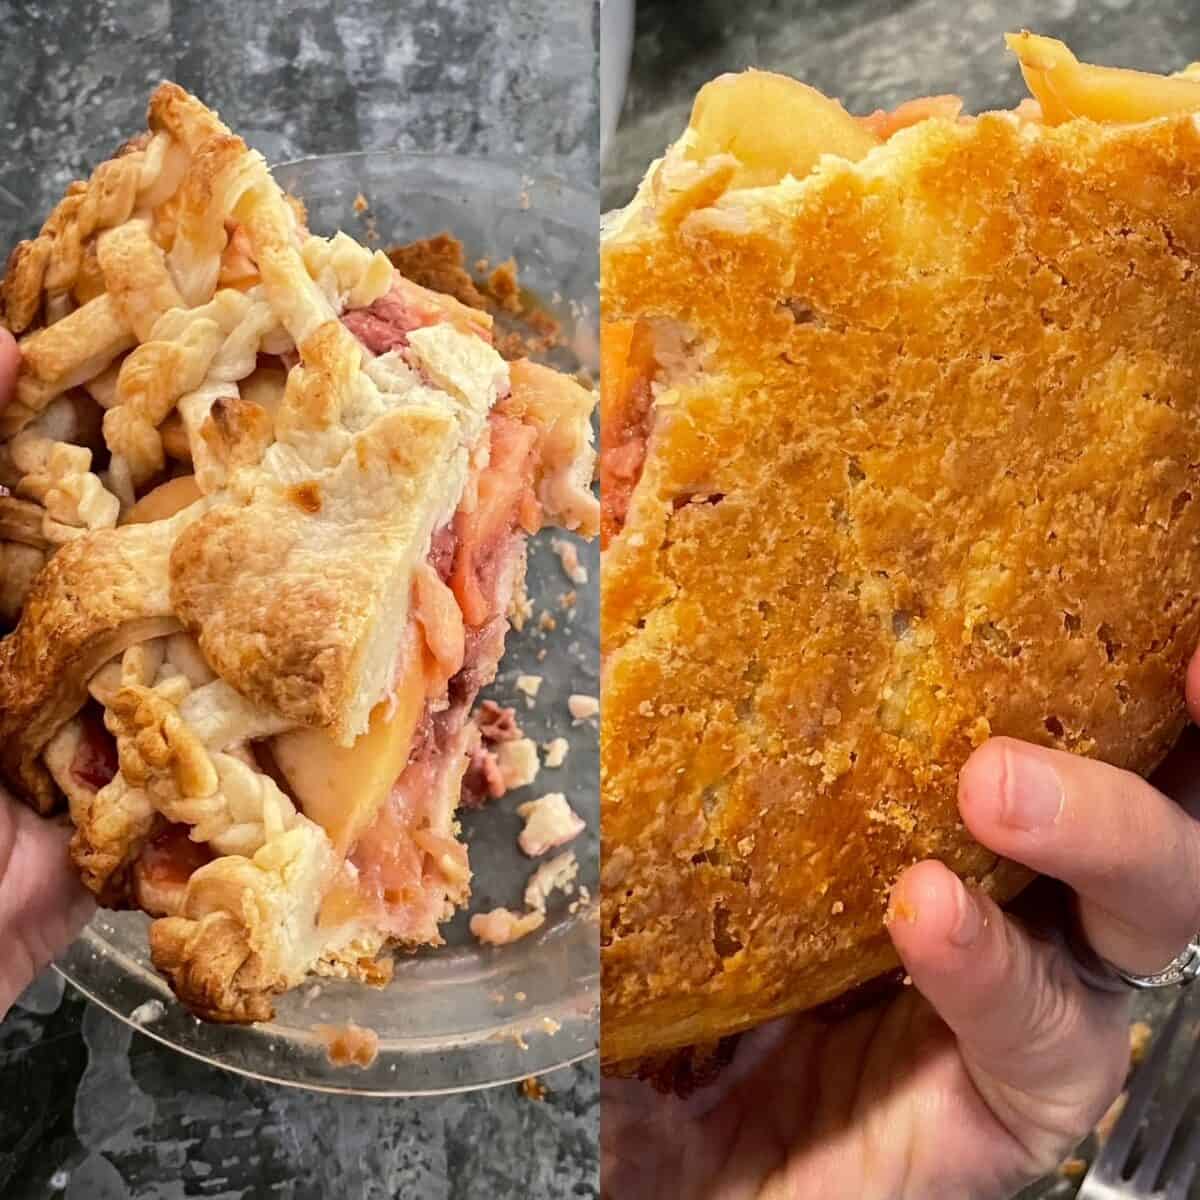 two panels showing wedge of strawberry apple pie in hand and the browned bottom crust.